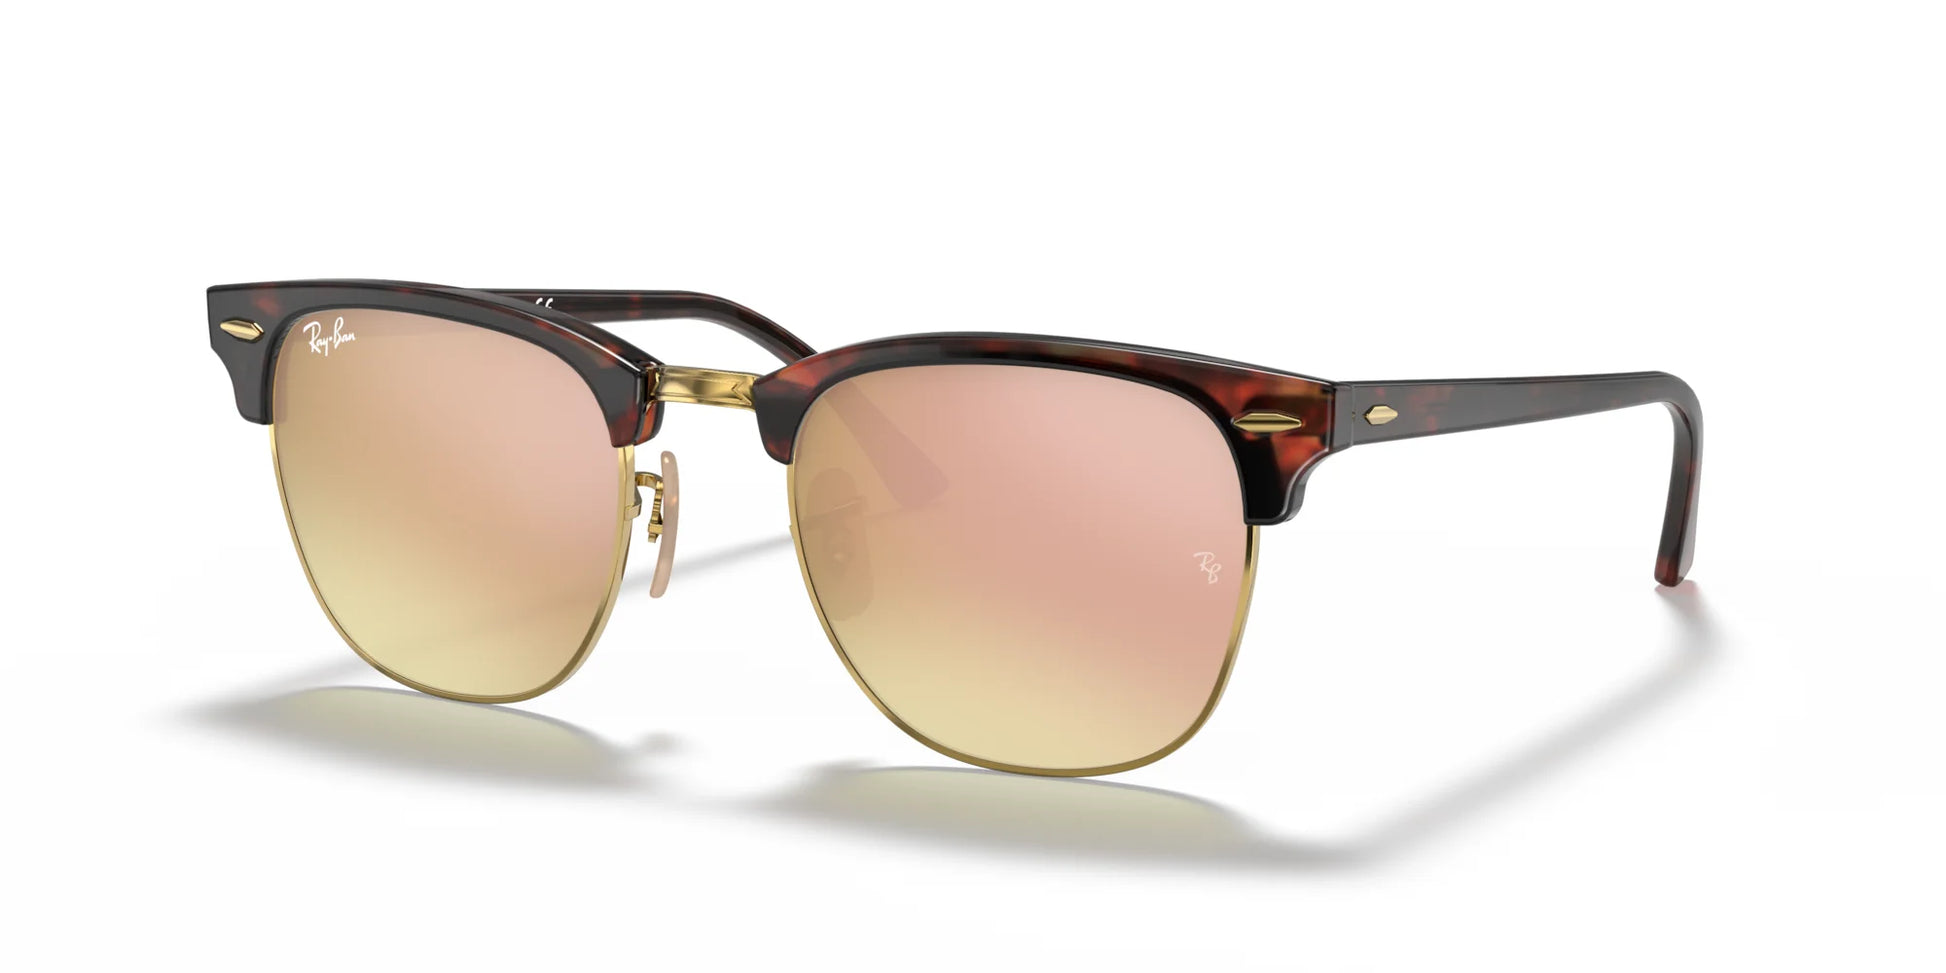 Ray-Ban CLUBMASTER RB3016 Sunglasses Red Havana / Copper Flash